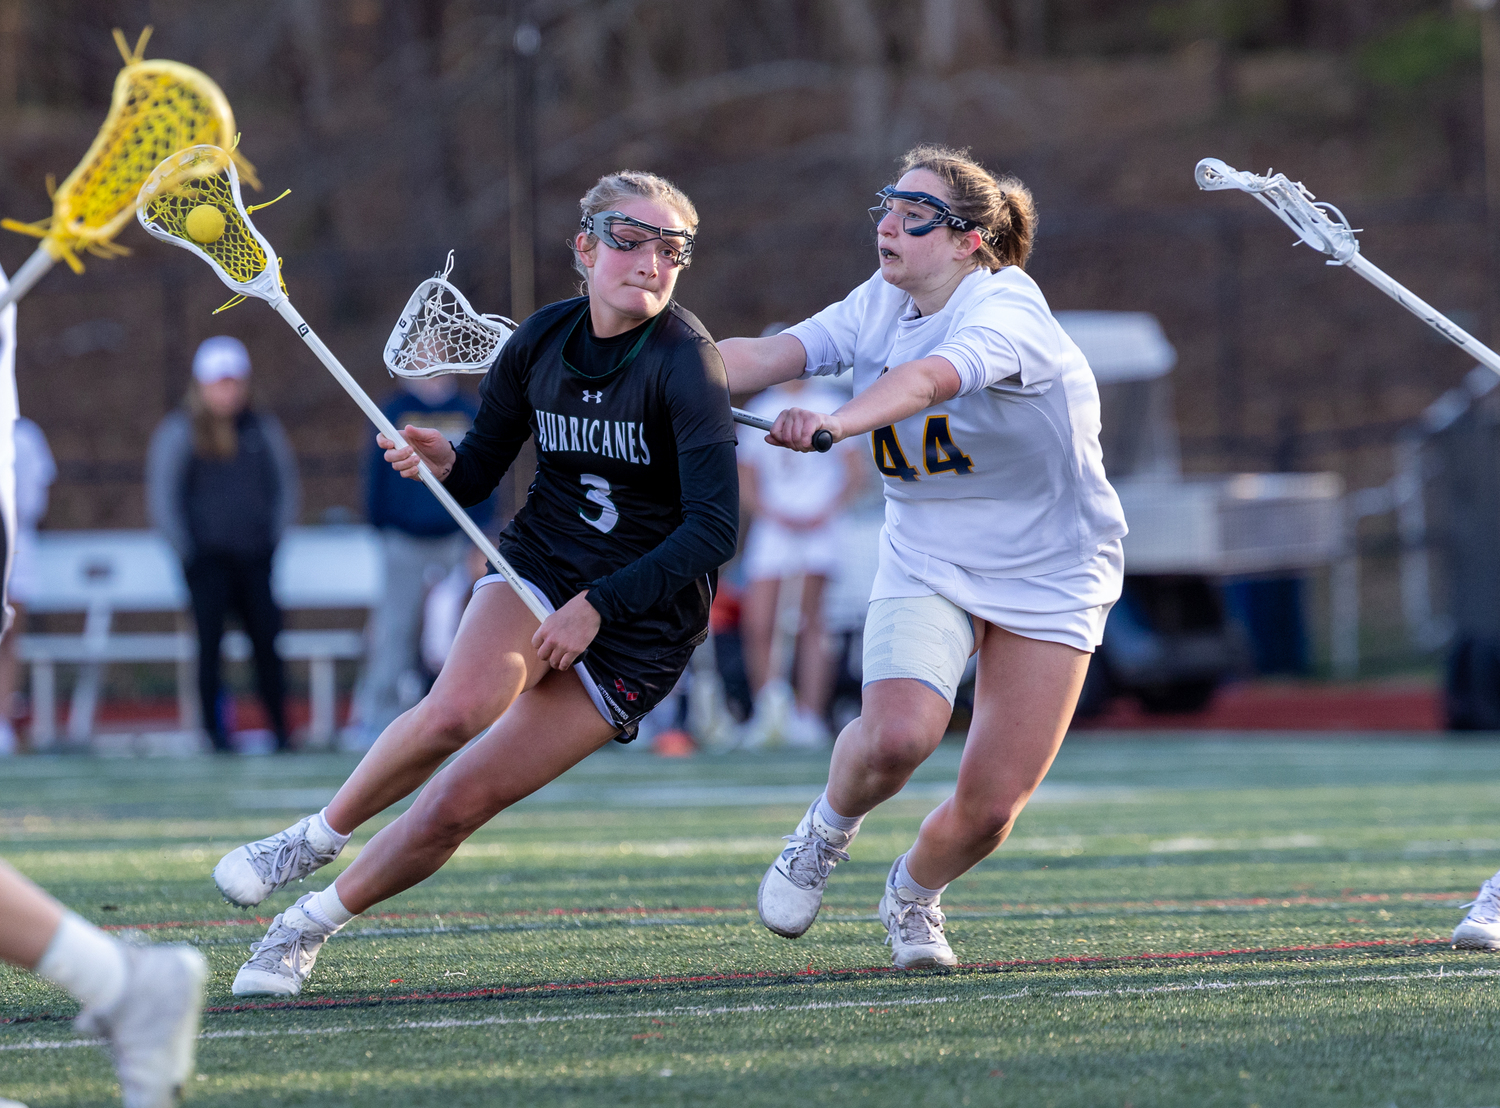 Junior midfielder Lily Graves battles an opponent as she makes her way to goal. RON ESPOSITO